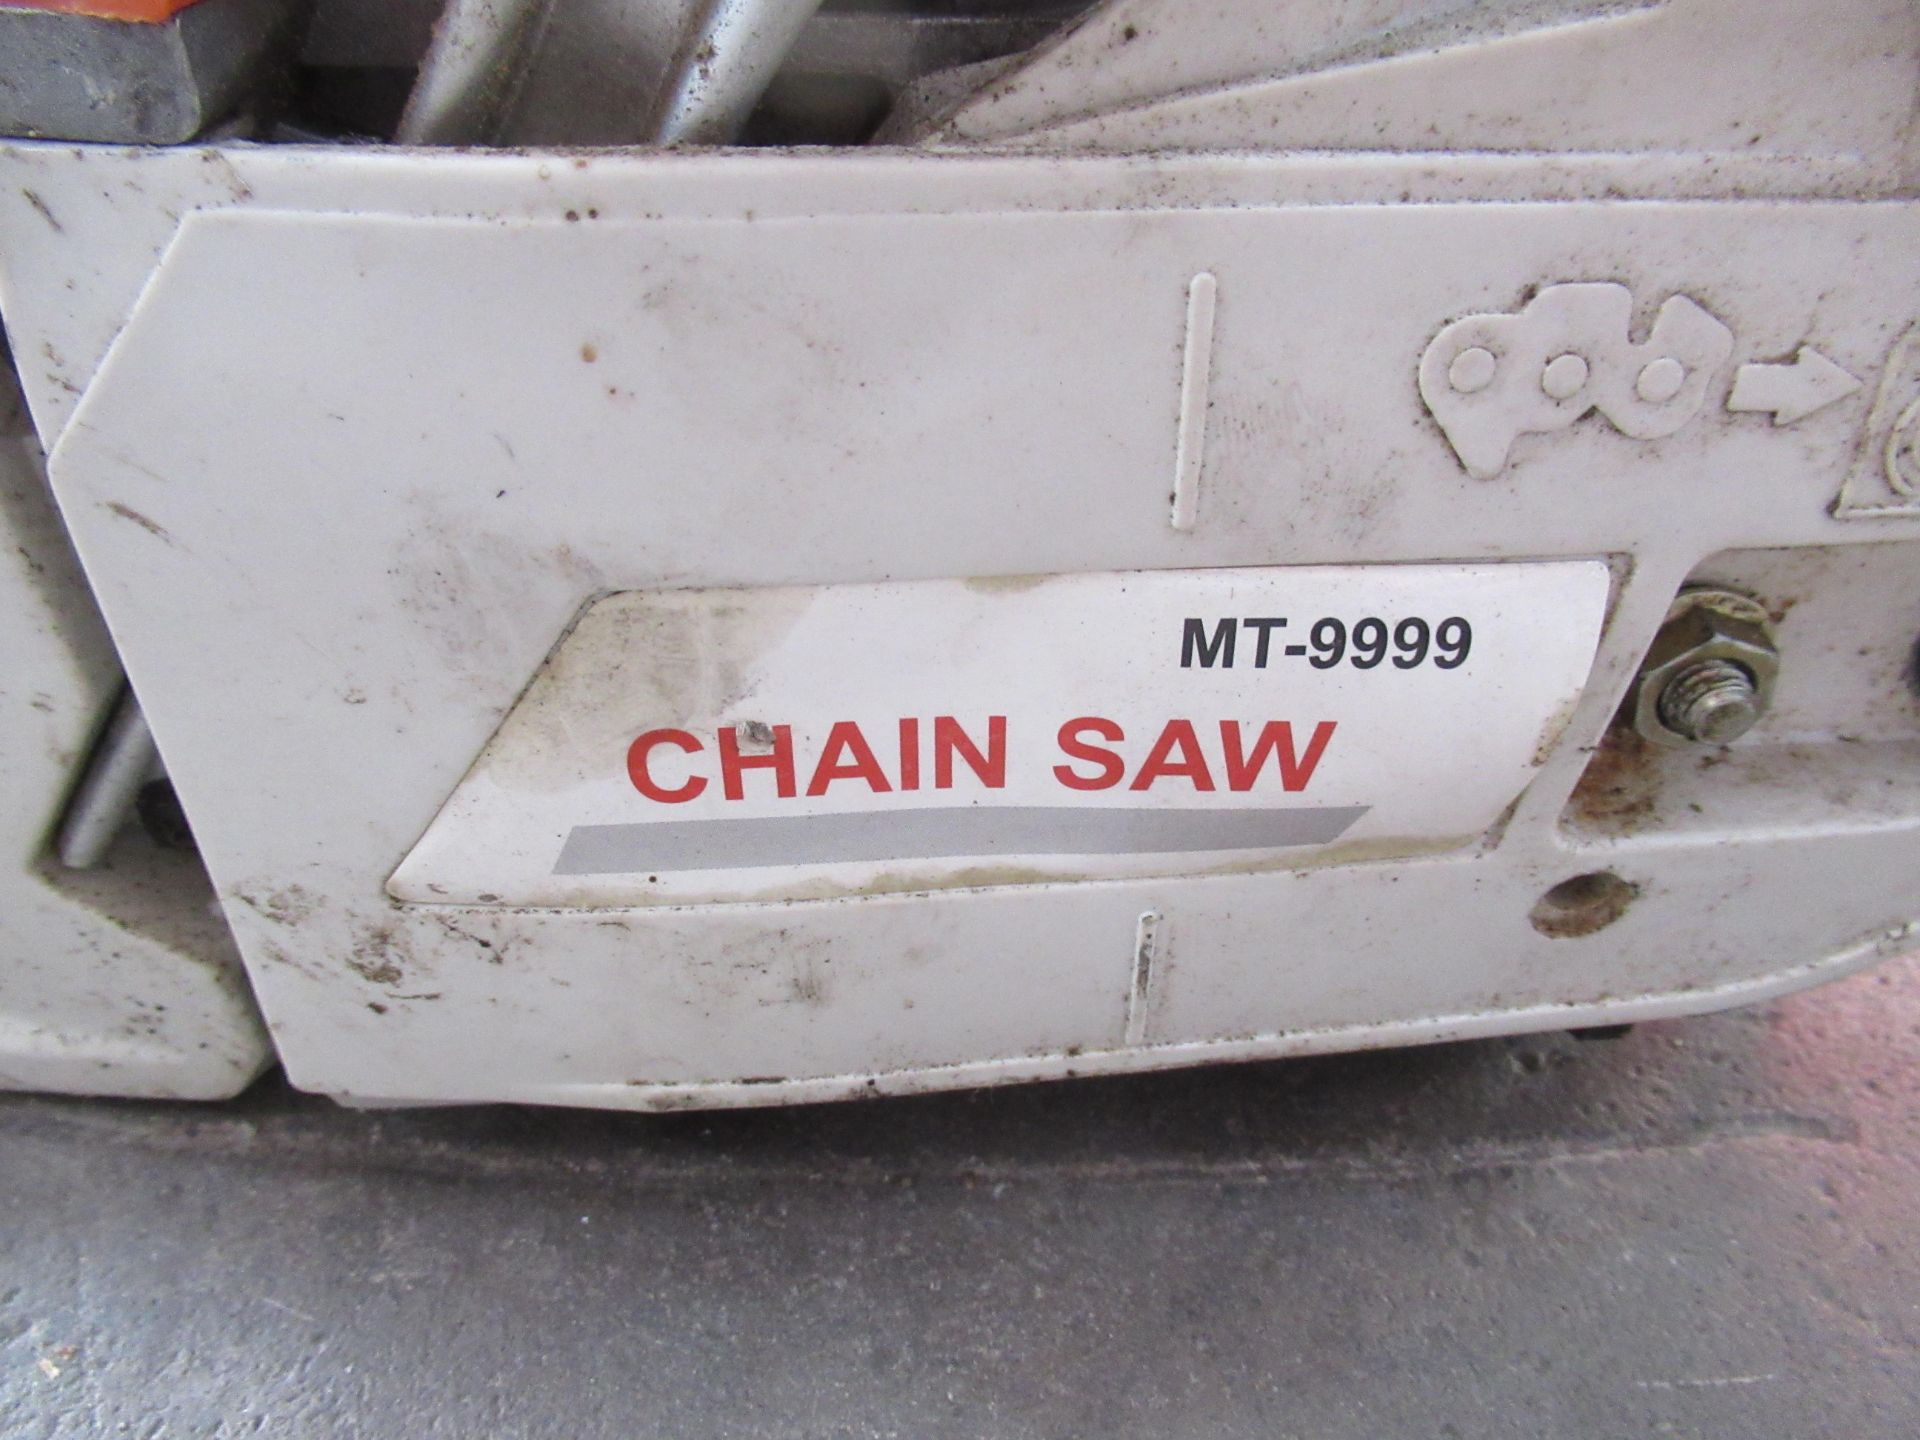 MT9999 chainsaw - Image 3 of 3